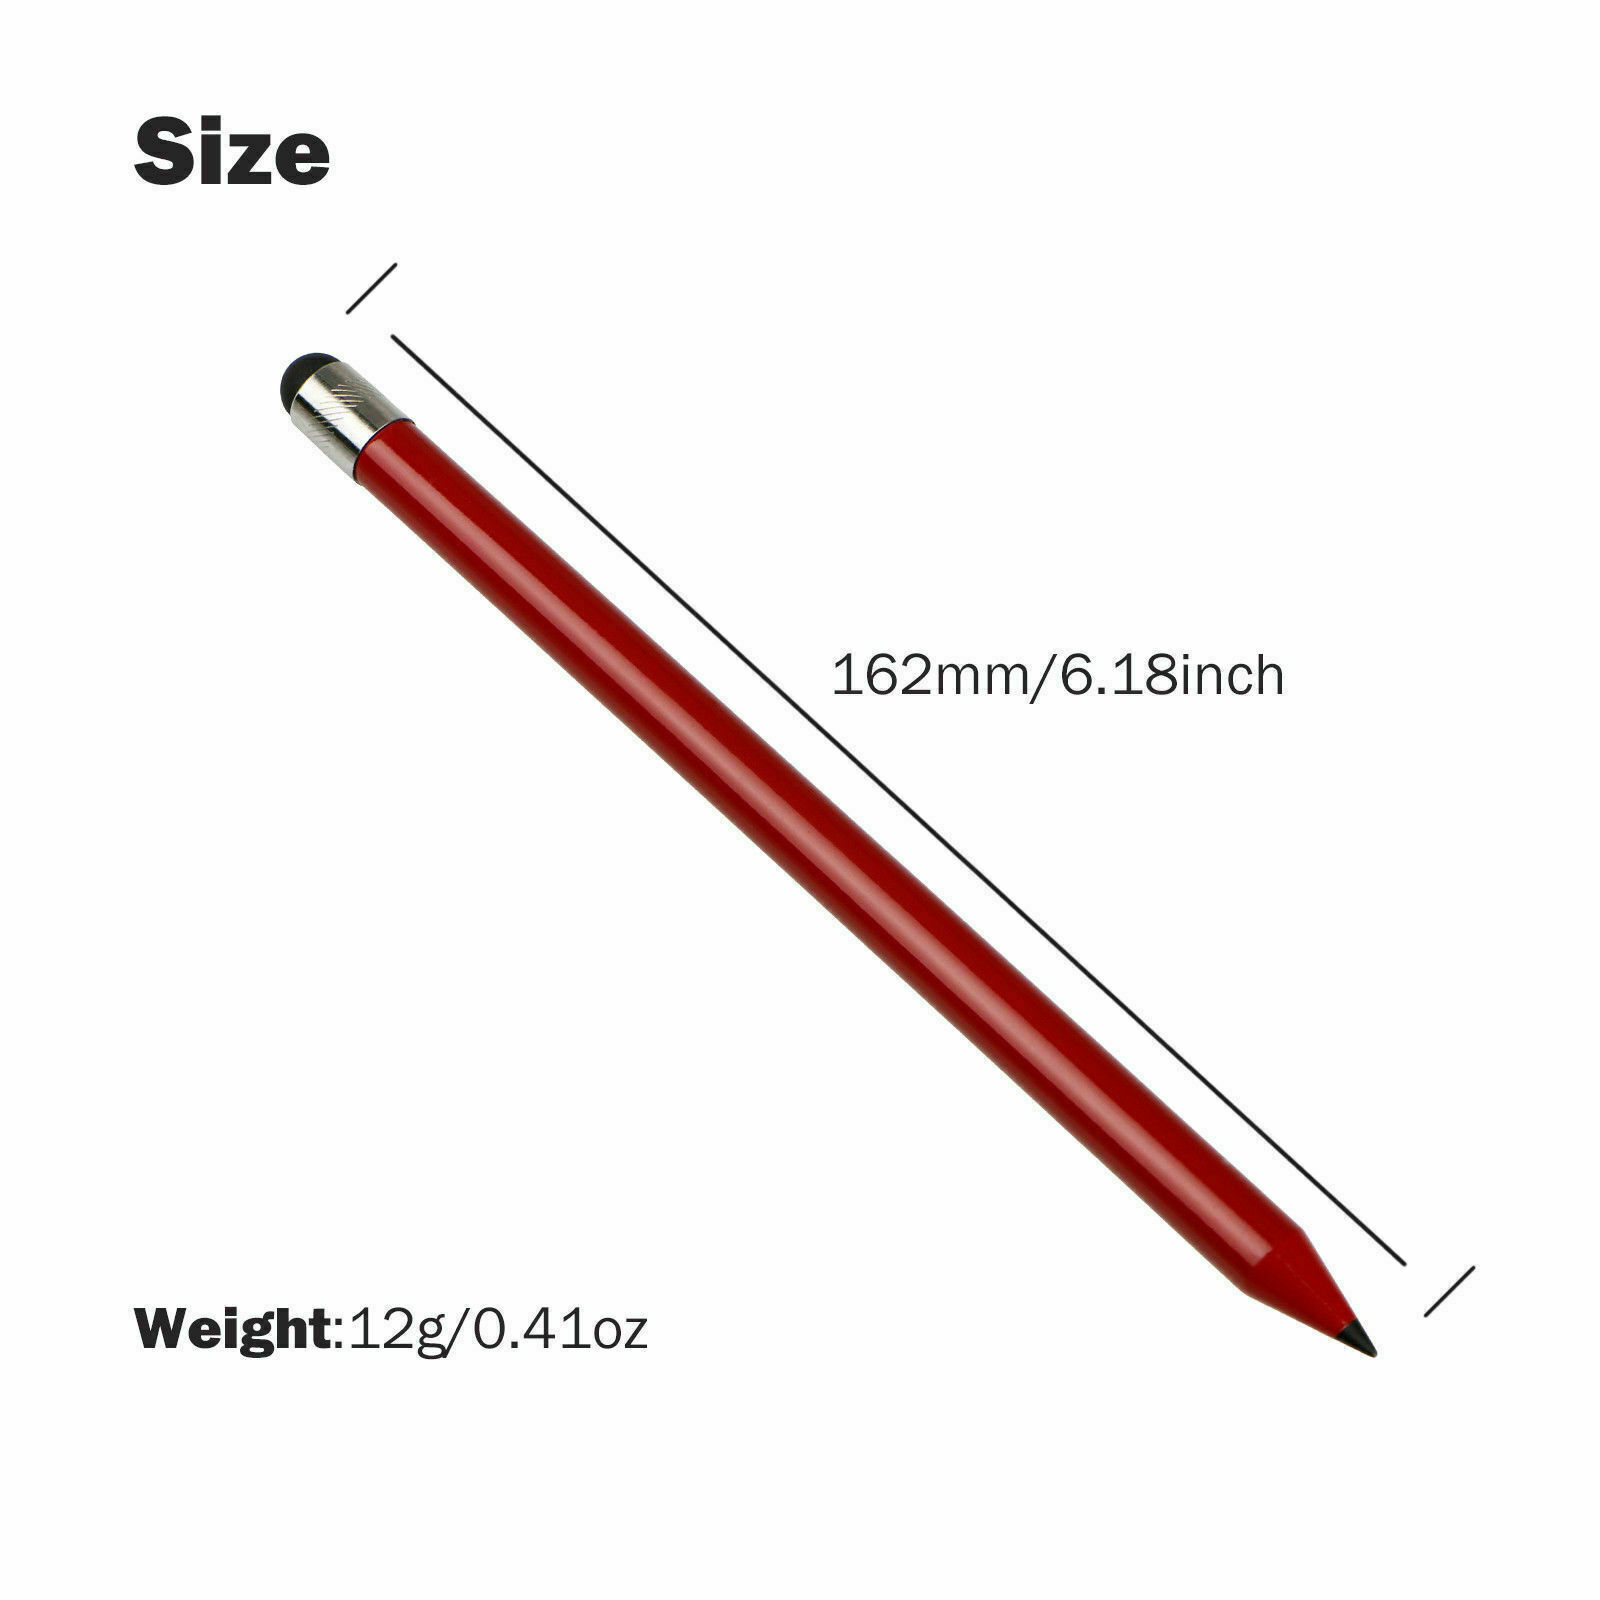 Precision Stylus Touch Screen Pen Pencil for iPhone iPad Samsung Tab  red